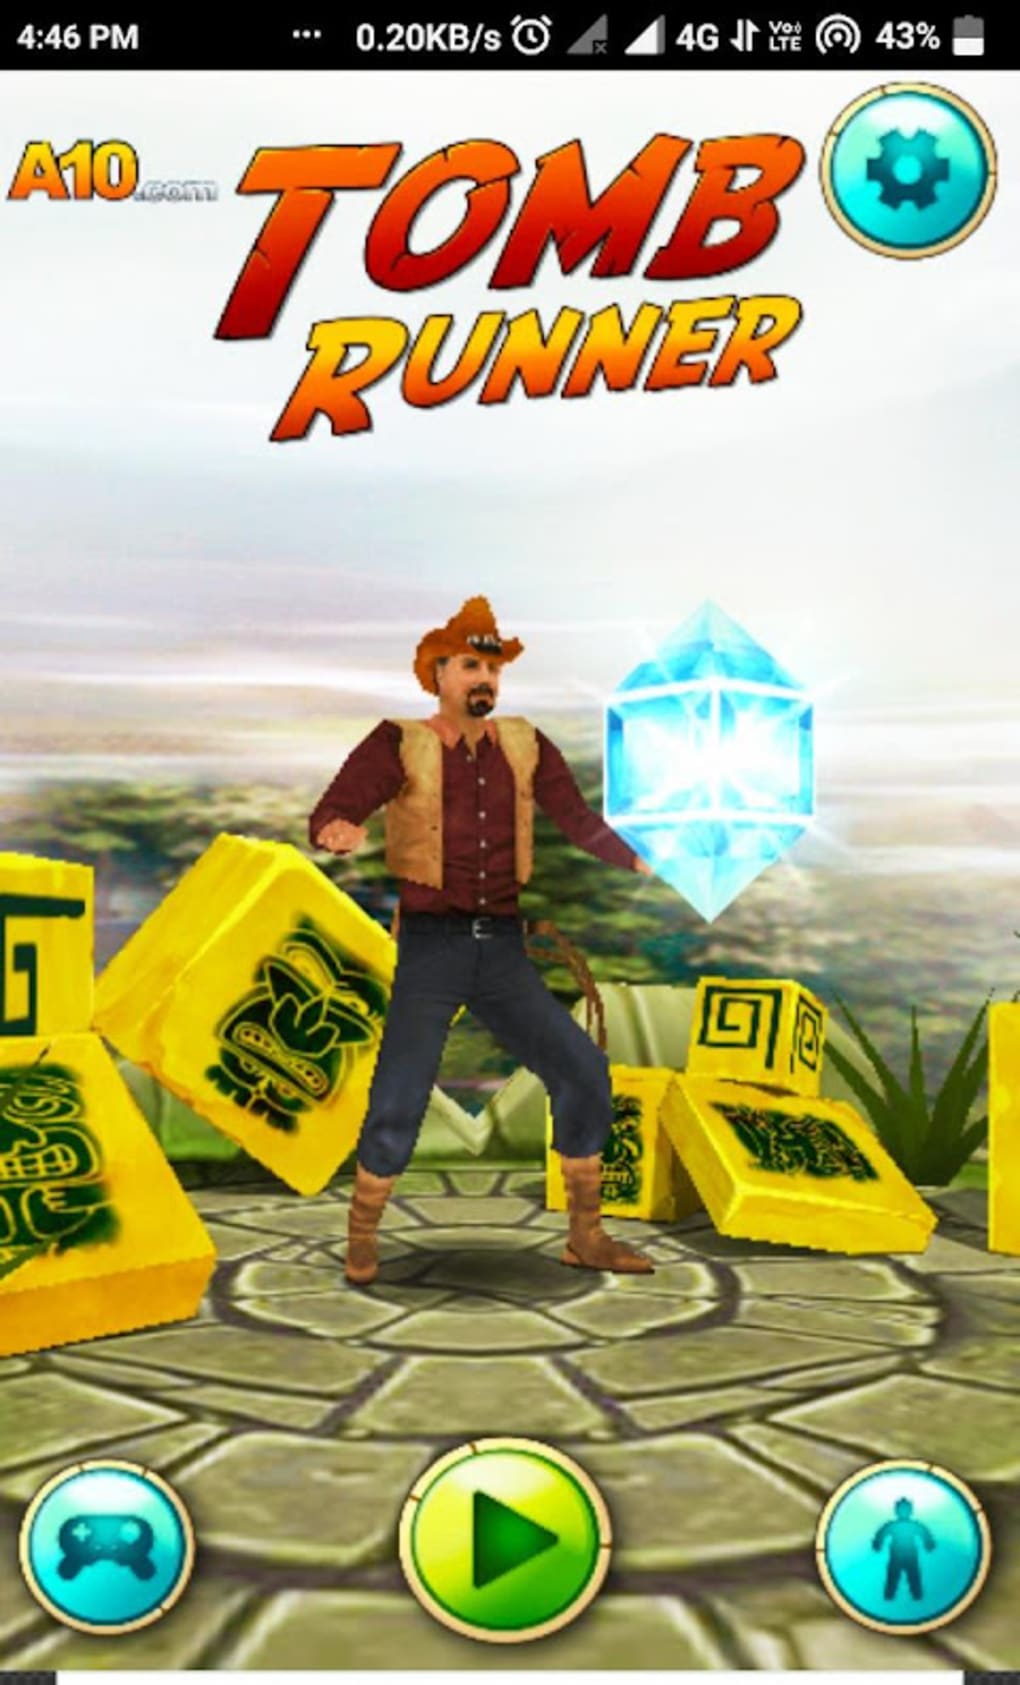 The HinterLands: Mining Game APK for Android Download